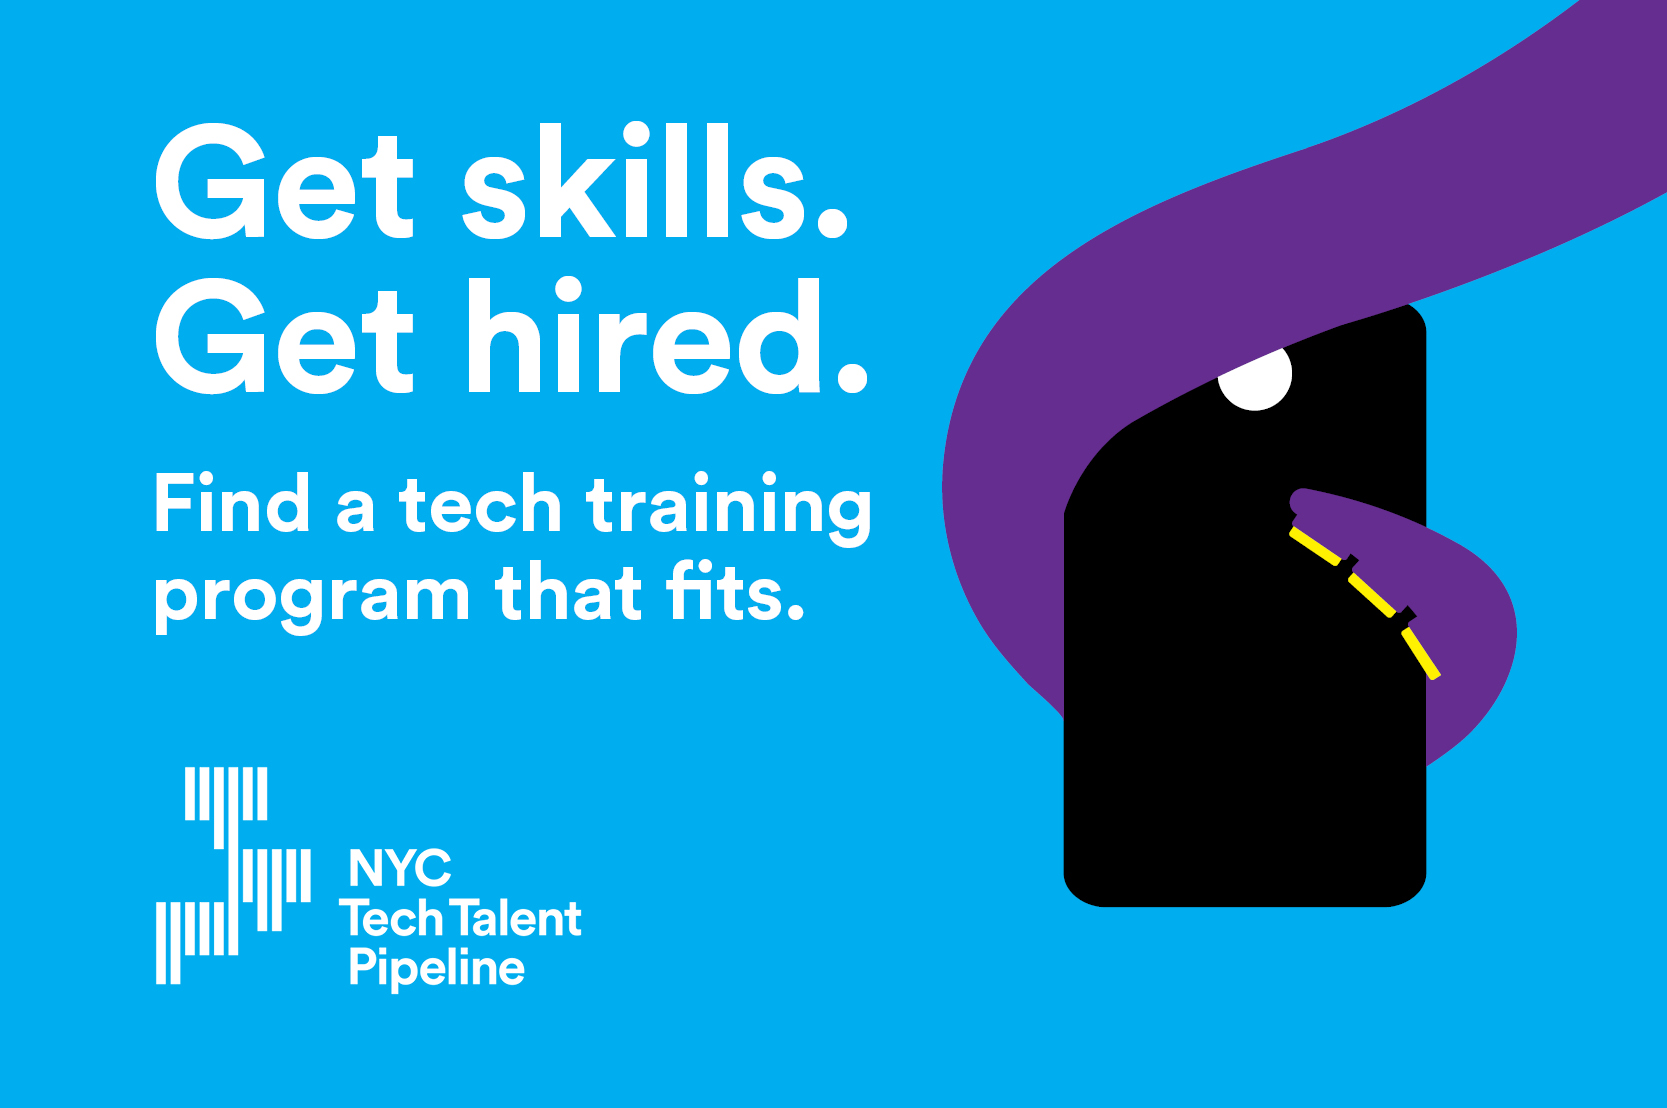 Get skills. Get hired. Find a tech training program that fits.